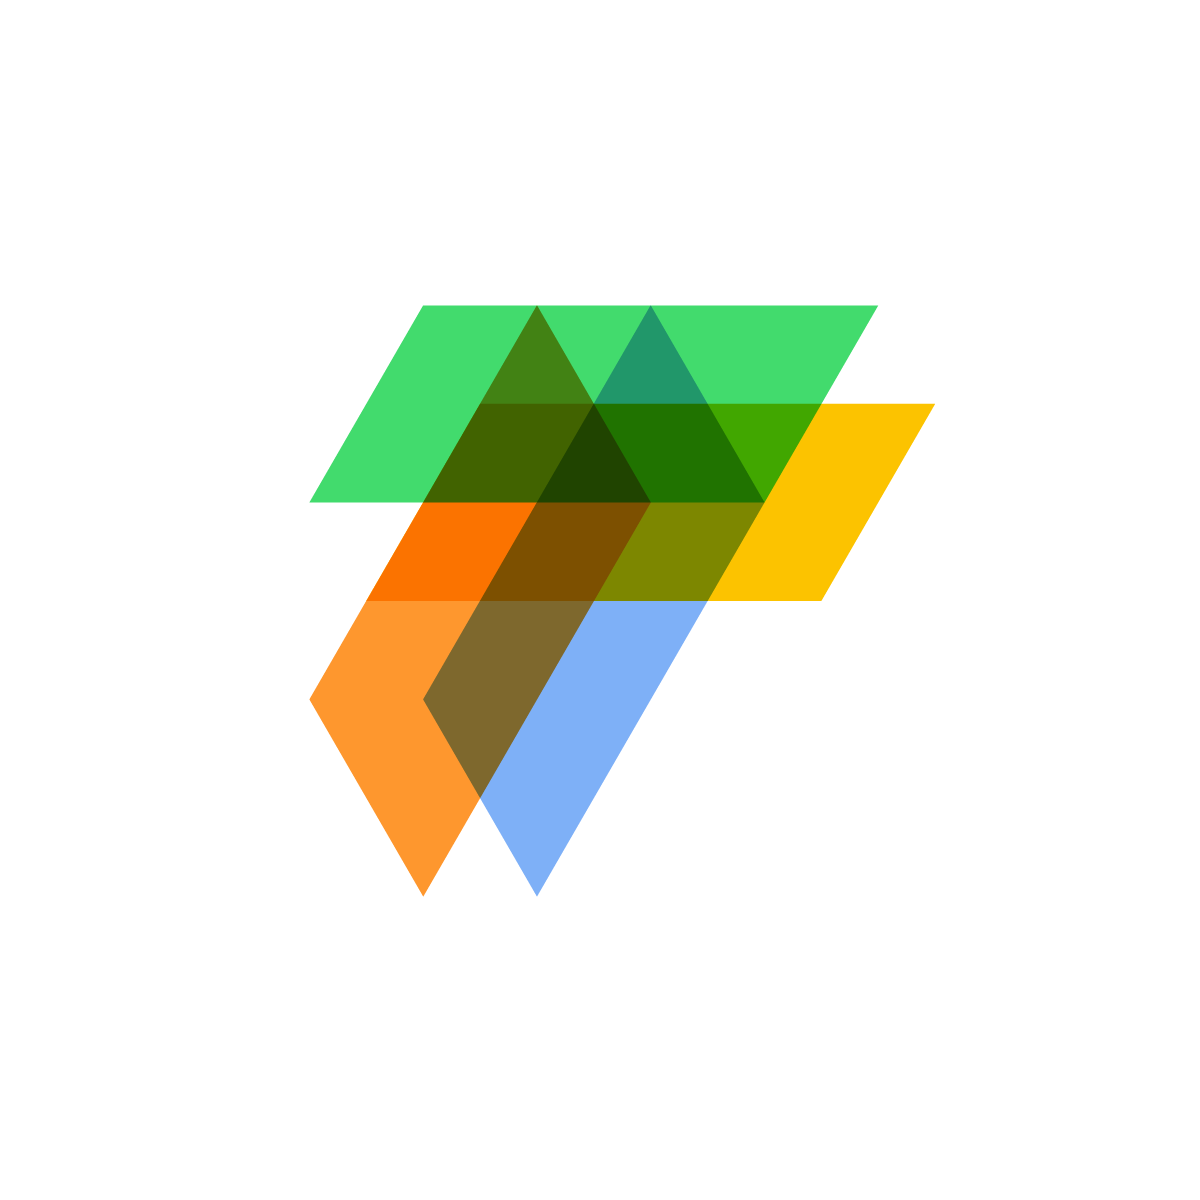 Abstract logo utilizing a triangle grid and colorful shapes to form the letter 'T,' employing creative stacking for a distinctive visual.